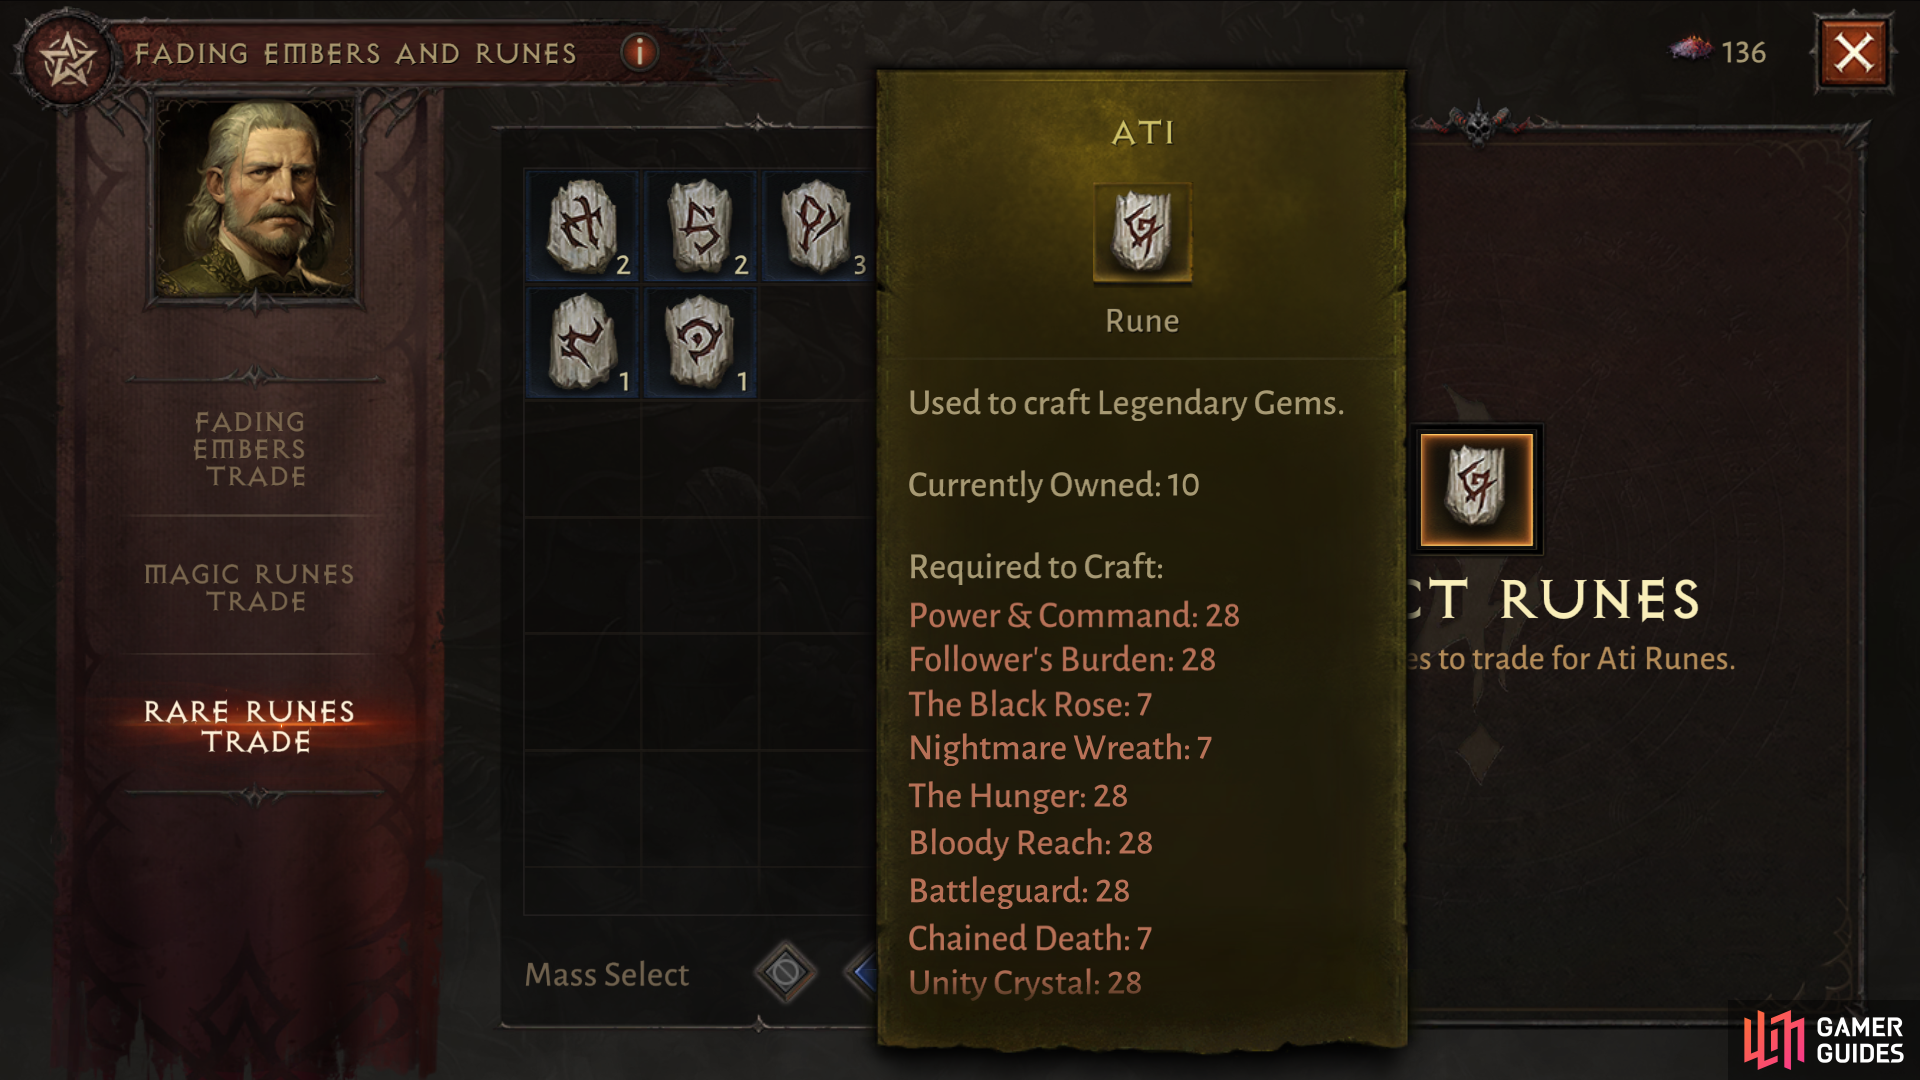 You can exchange magical and rare runes for ATI runes, which are a universal component in crafting specific Legendary Gems.